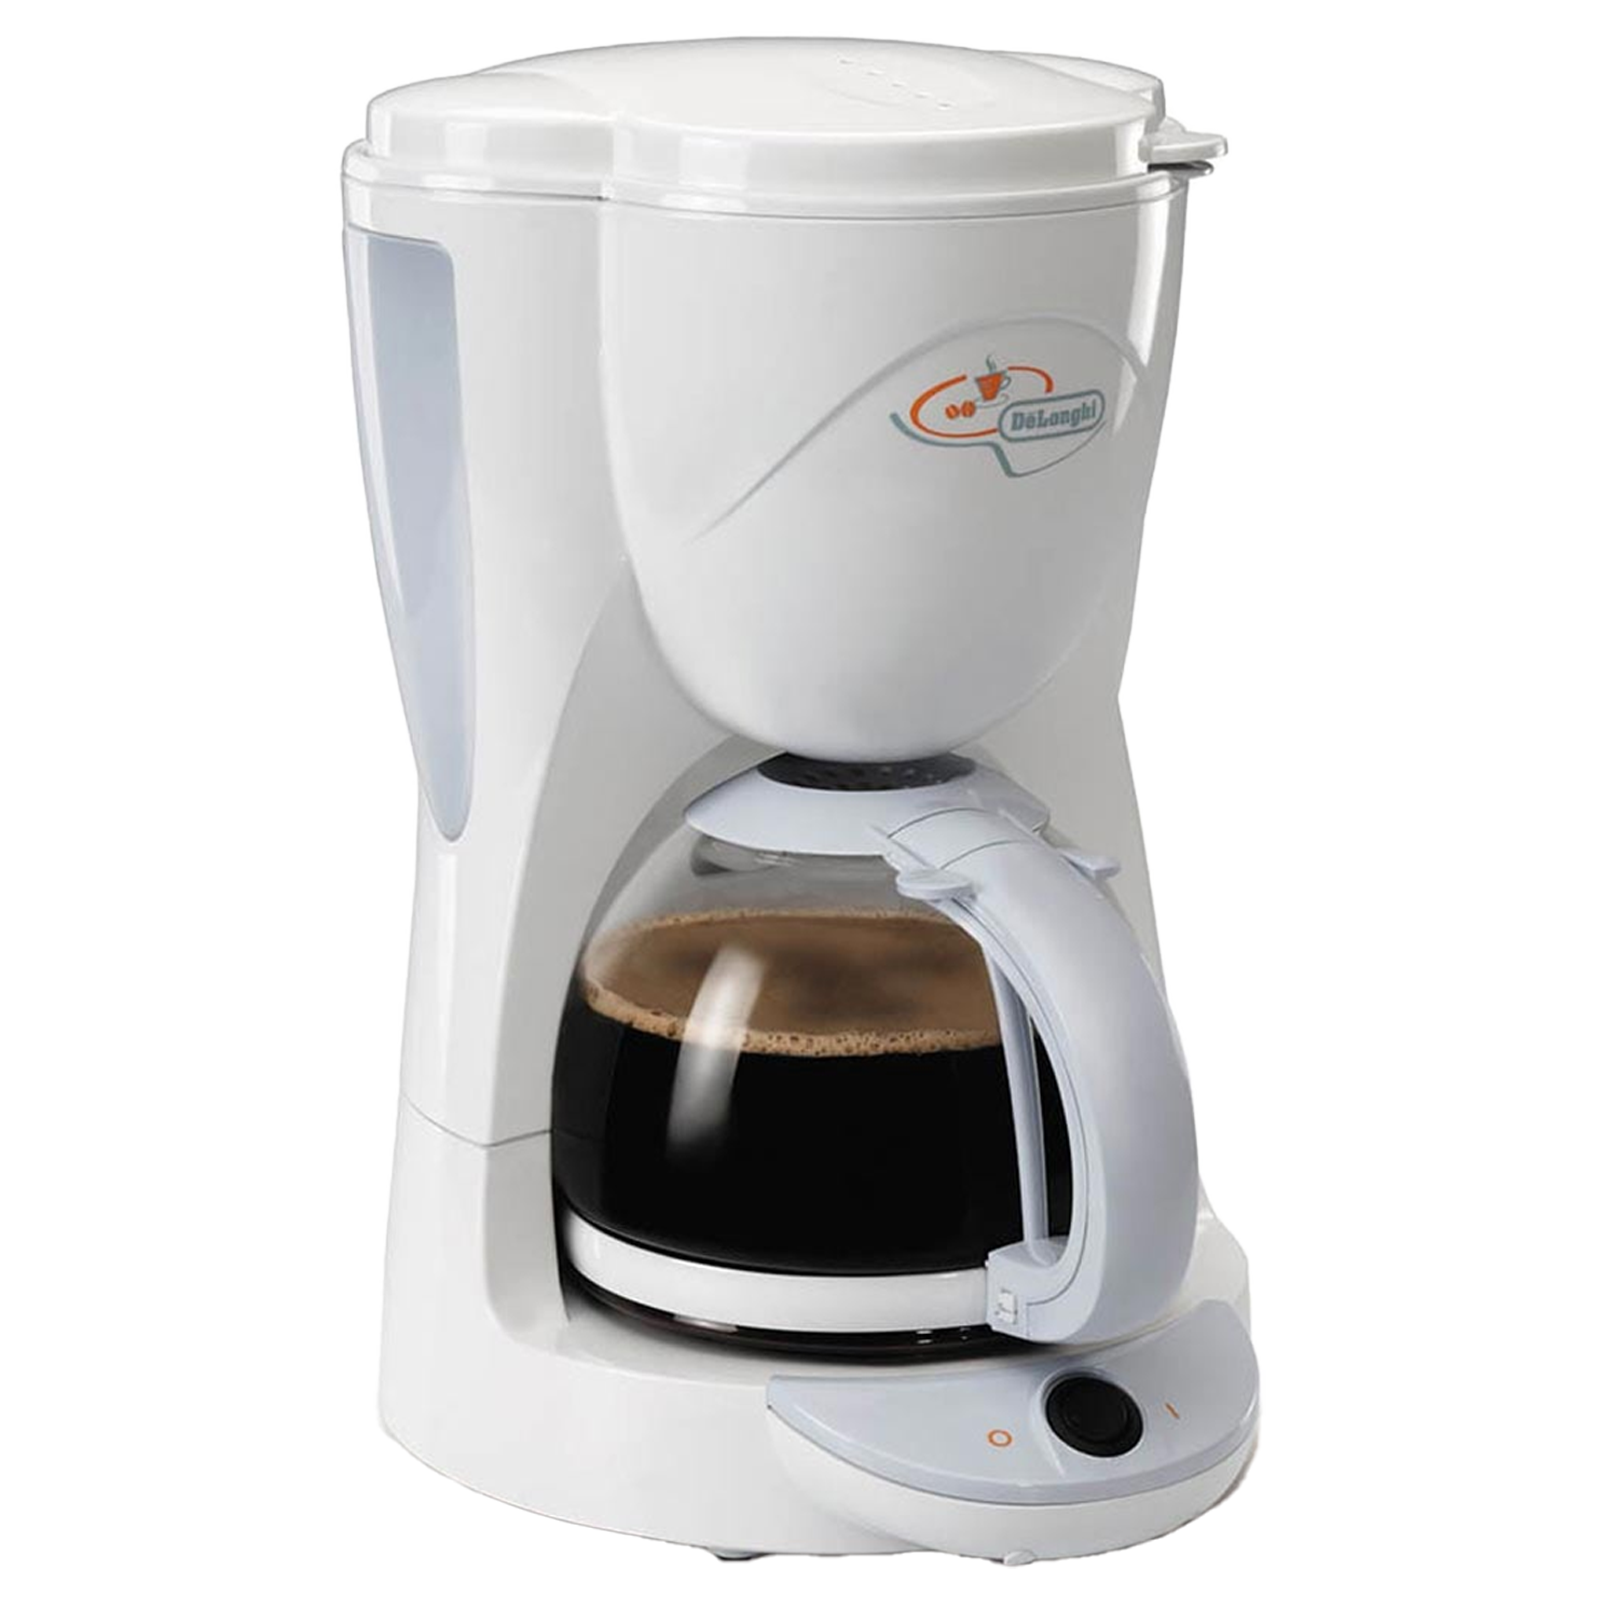 DeLonghi ICM2 10 Cups Fully Automatic Coffee Maker (Drip Coffee, 132301076, White)_3